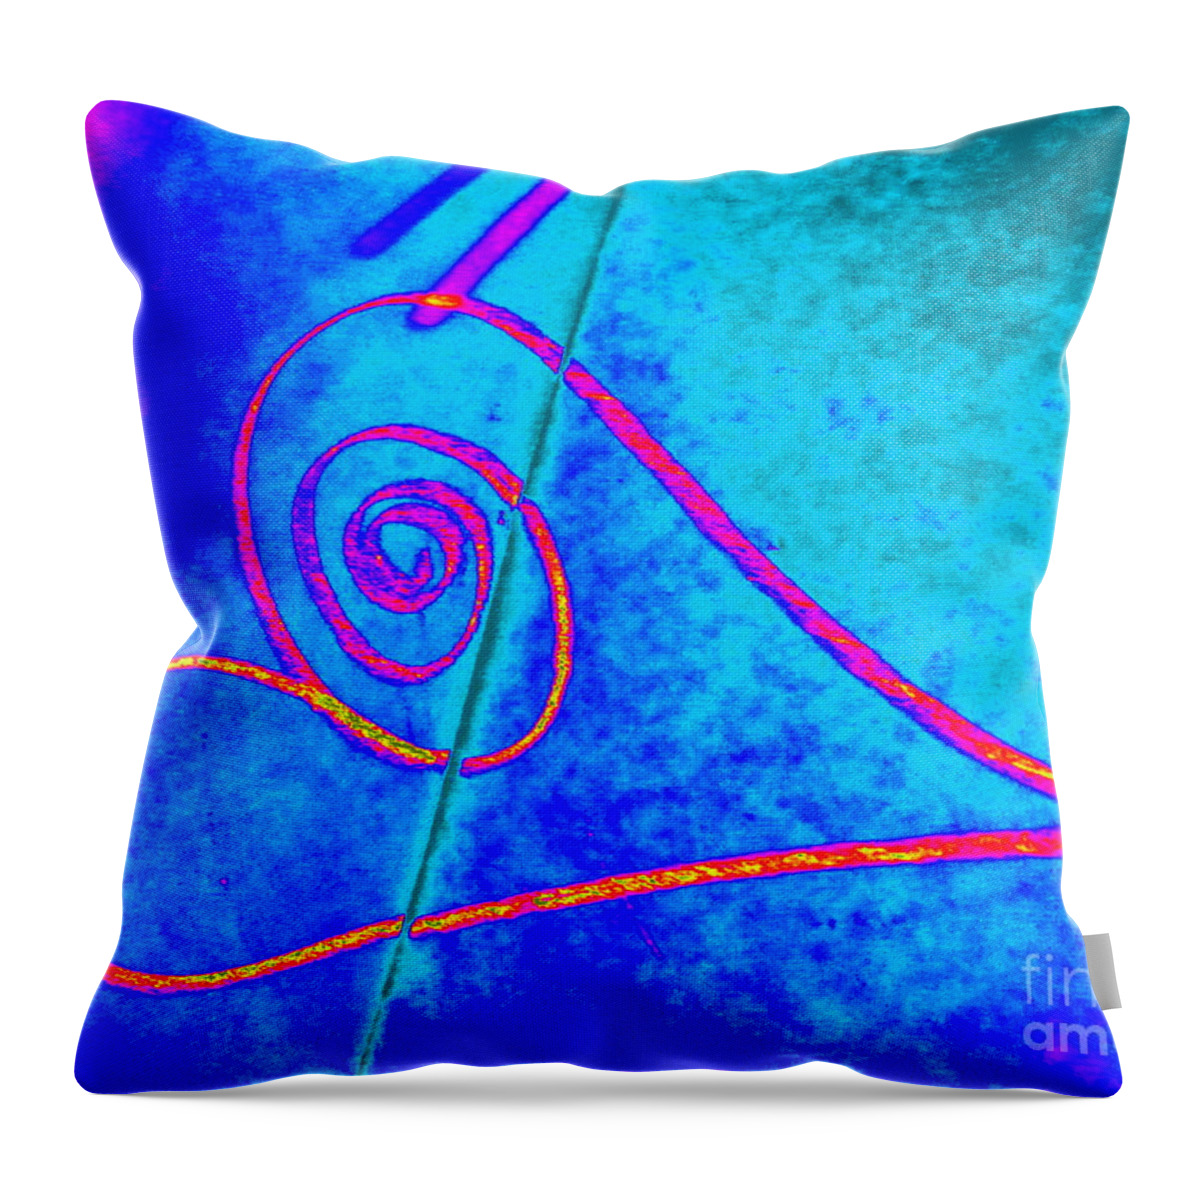 Heart Throw Pillow featuring the photograph Vortex Heart by Mars Besso